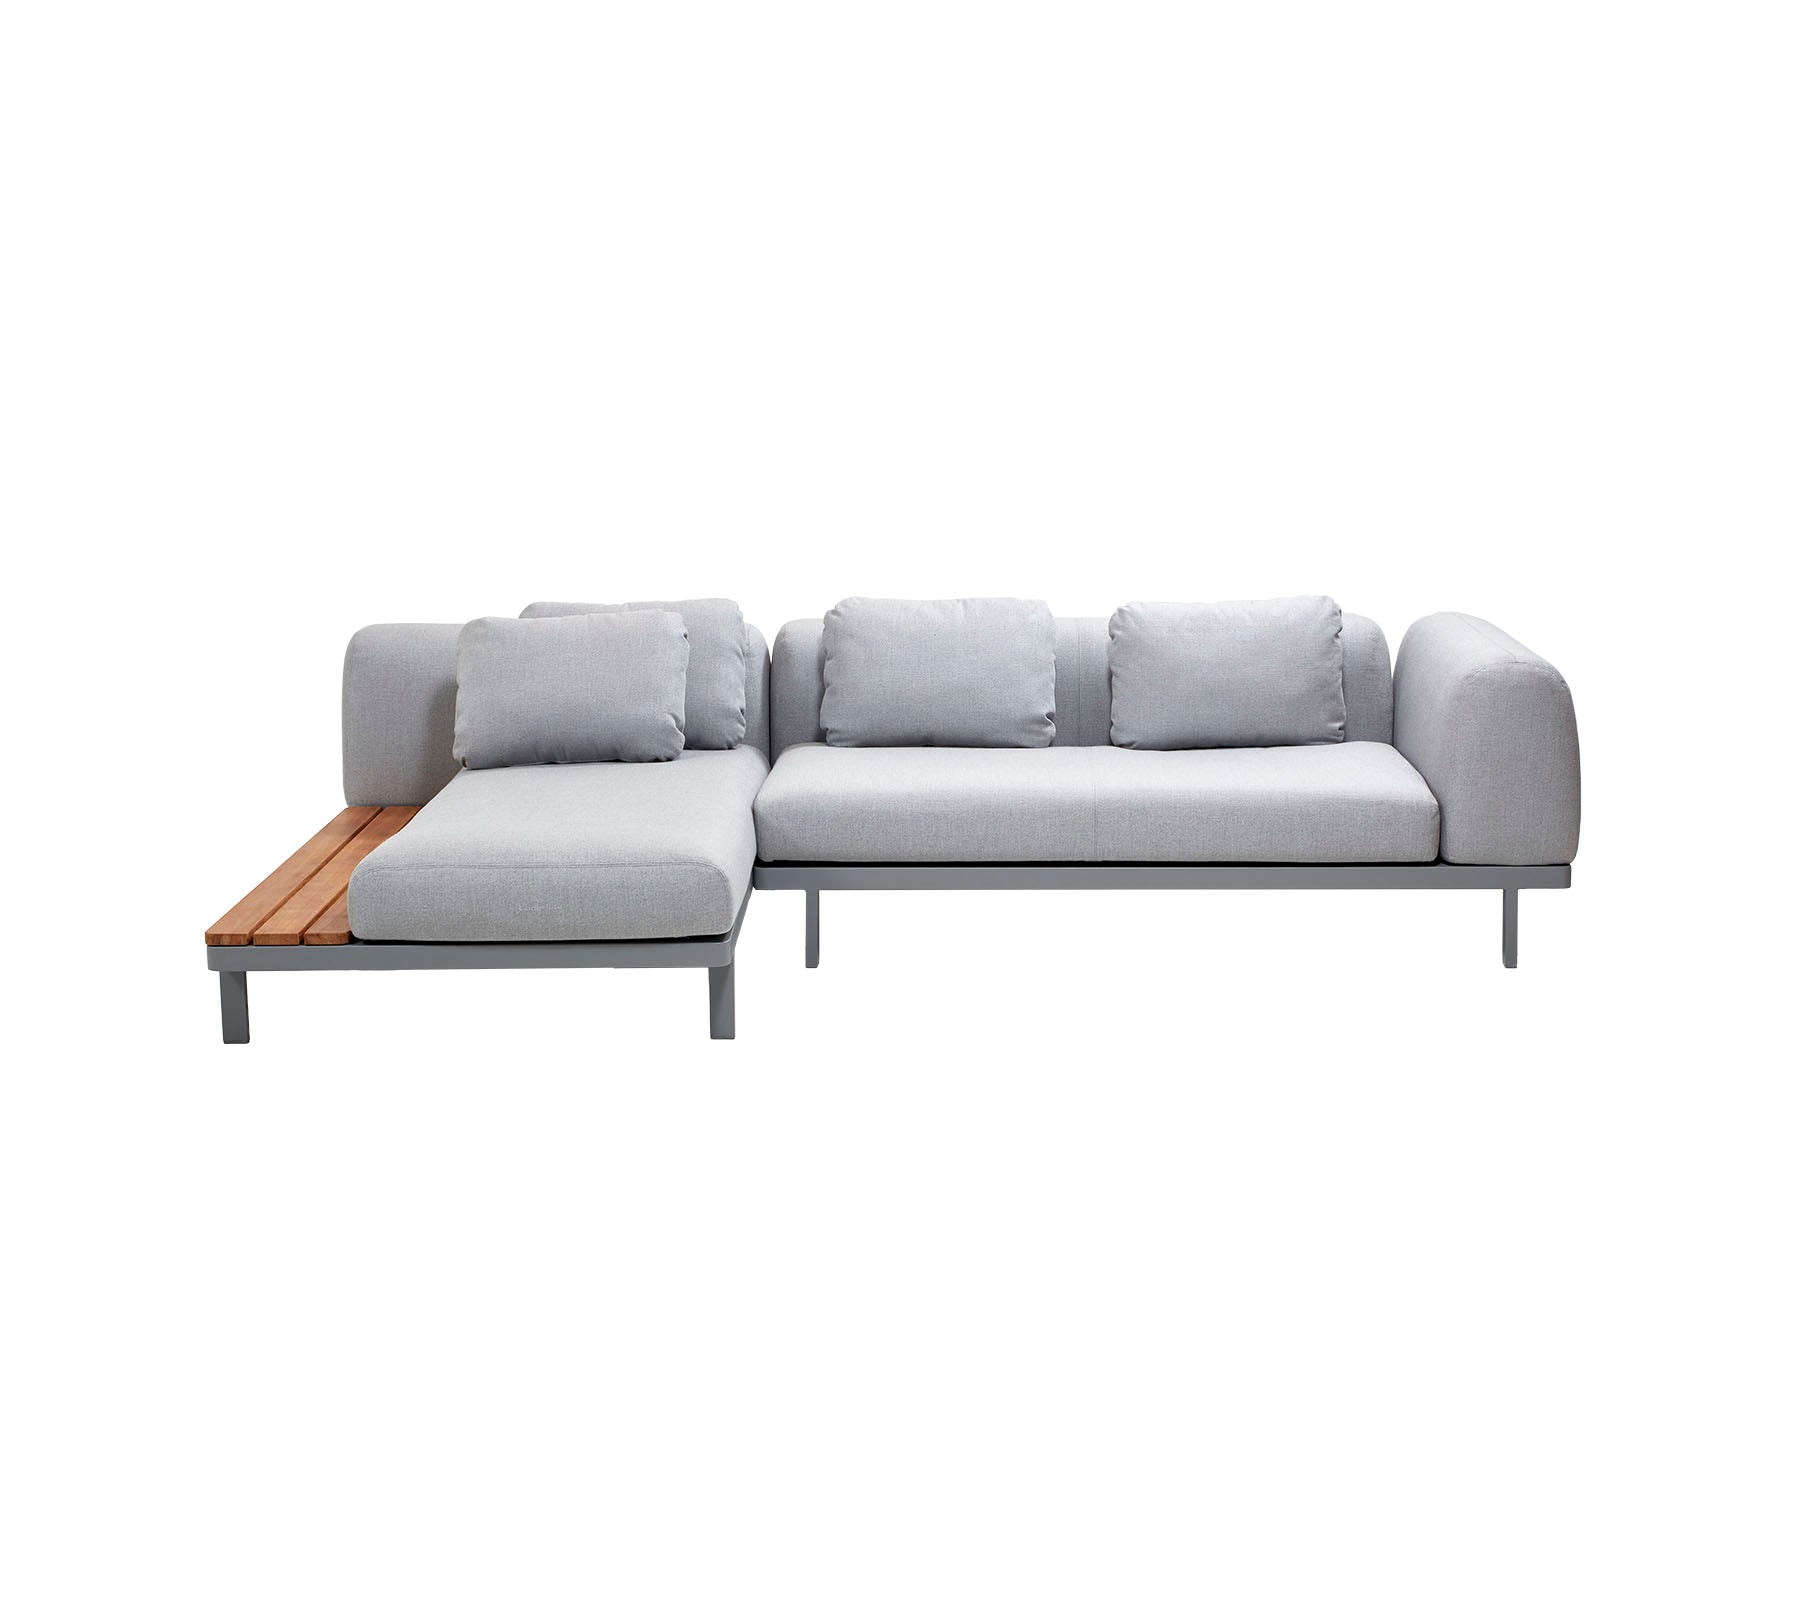 Cane-Line -Space lounge w/Cane-line AirTouch cushions (1)